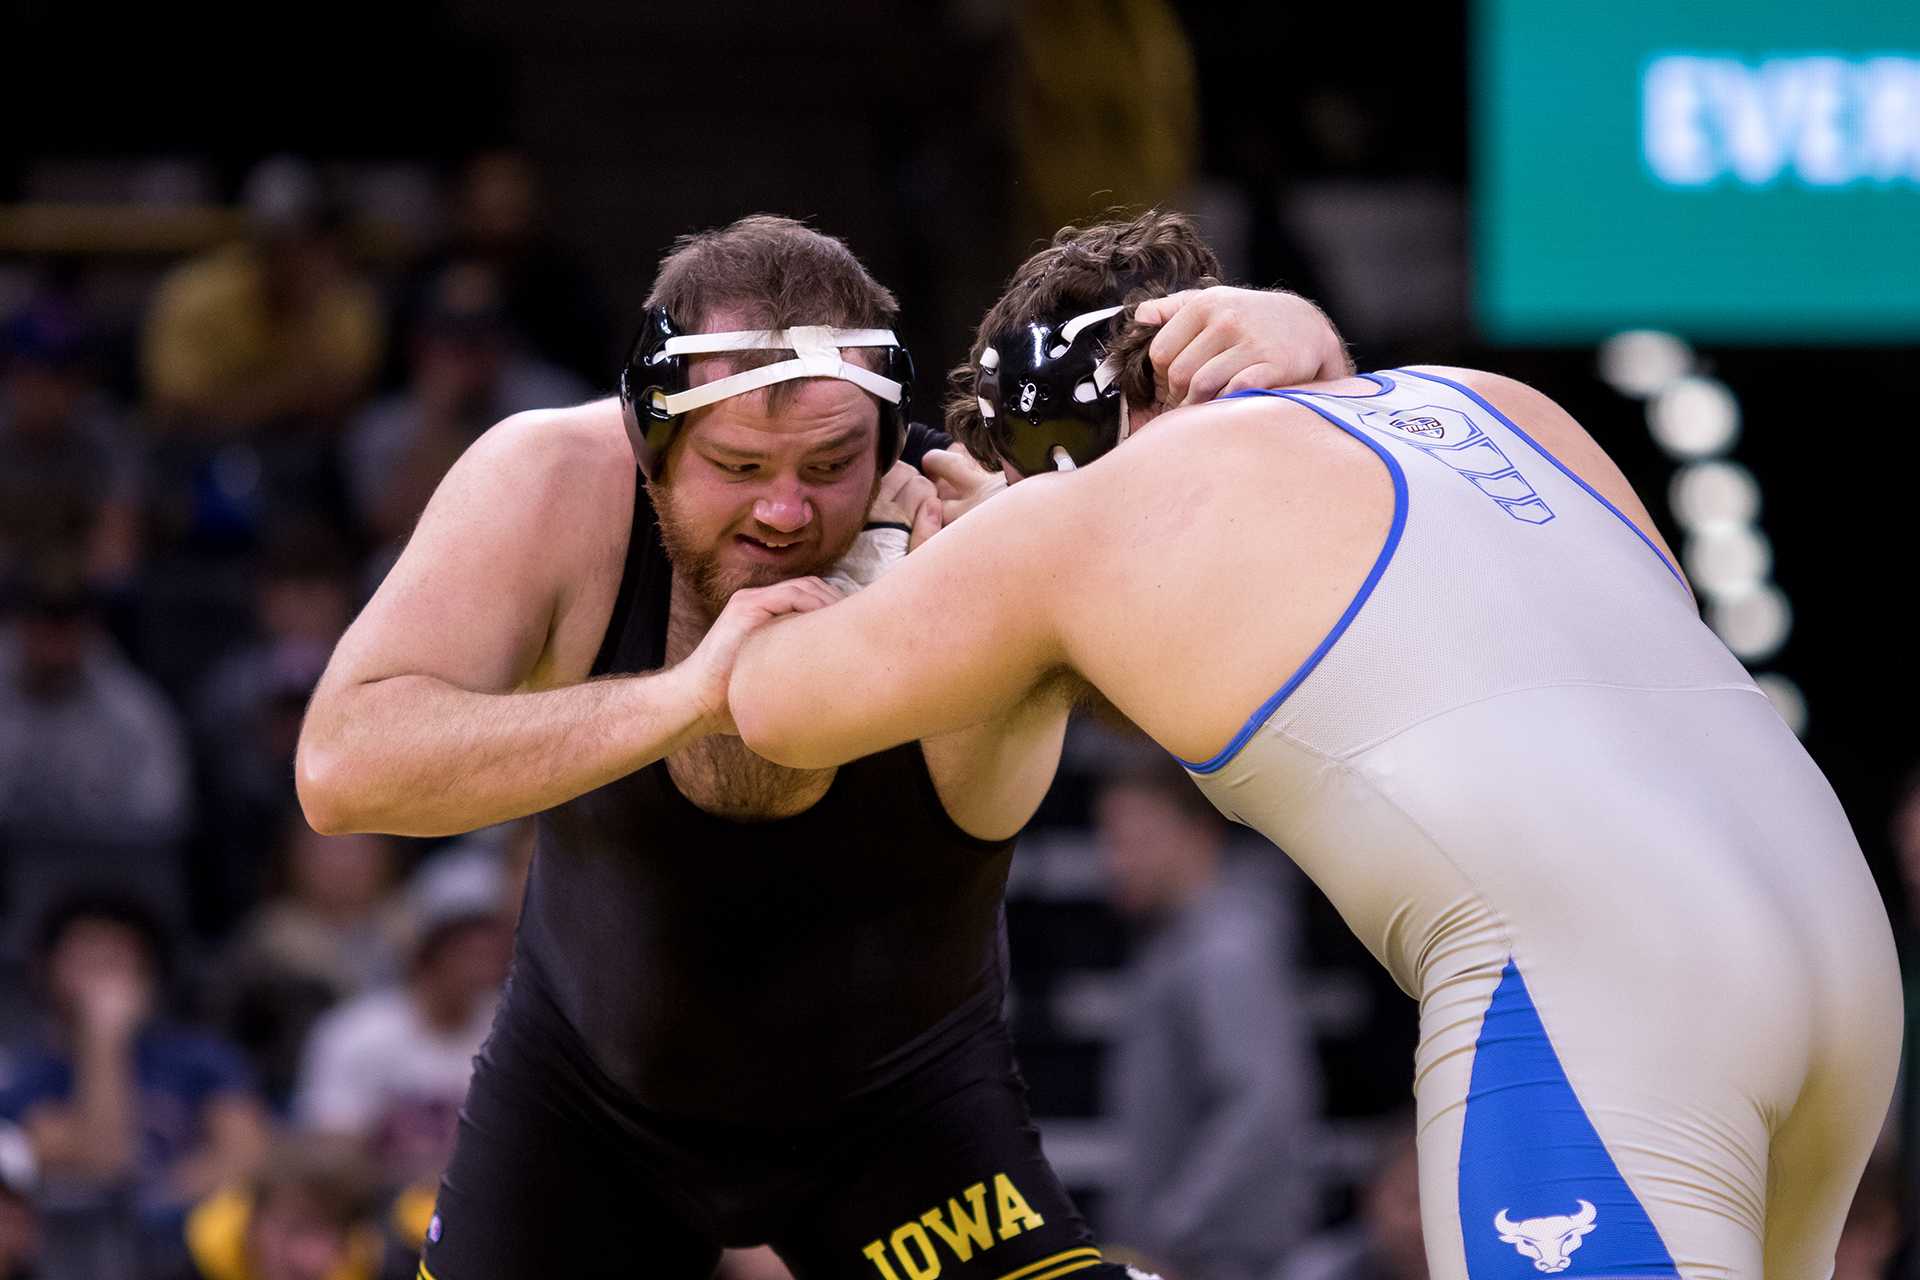 Iowa’s Sam Stoll wrestles with the University of Buffalo’s Jake Gunning in the 285-lb weight class on Friday, Nov. 17, 2017. Stoll defeated Gunning by a score of 4-3. (David Harmantas/The Daily Iowan)